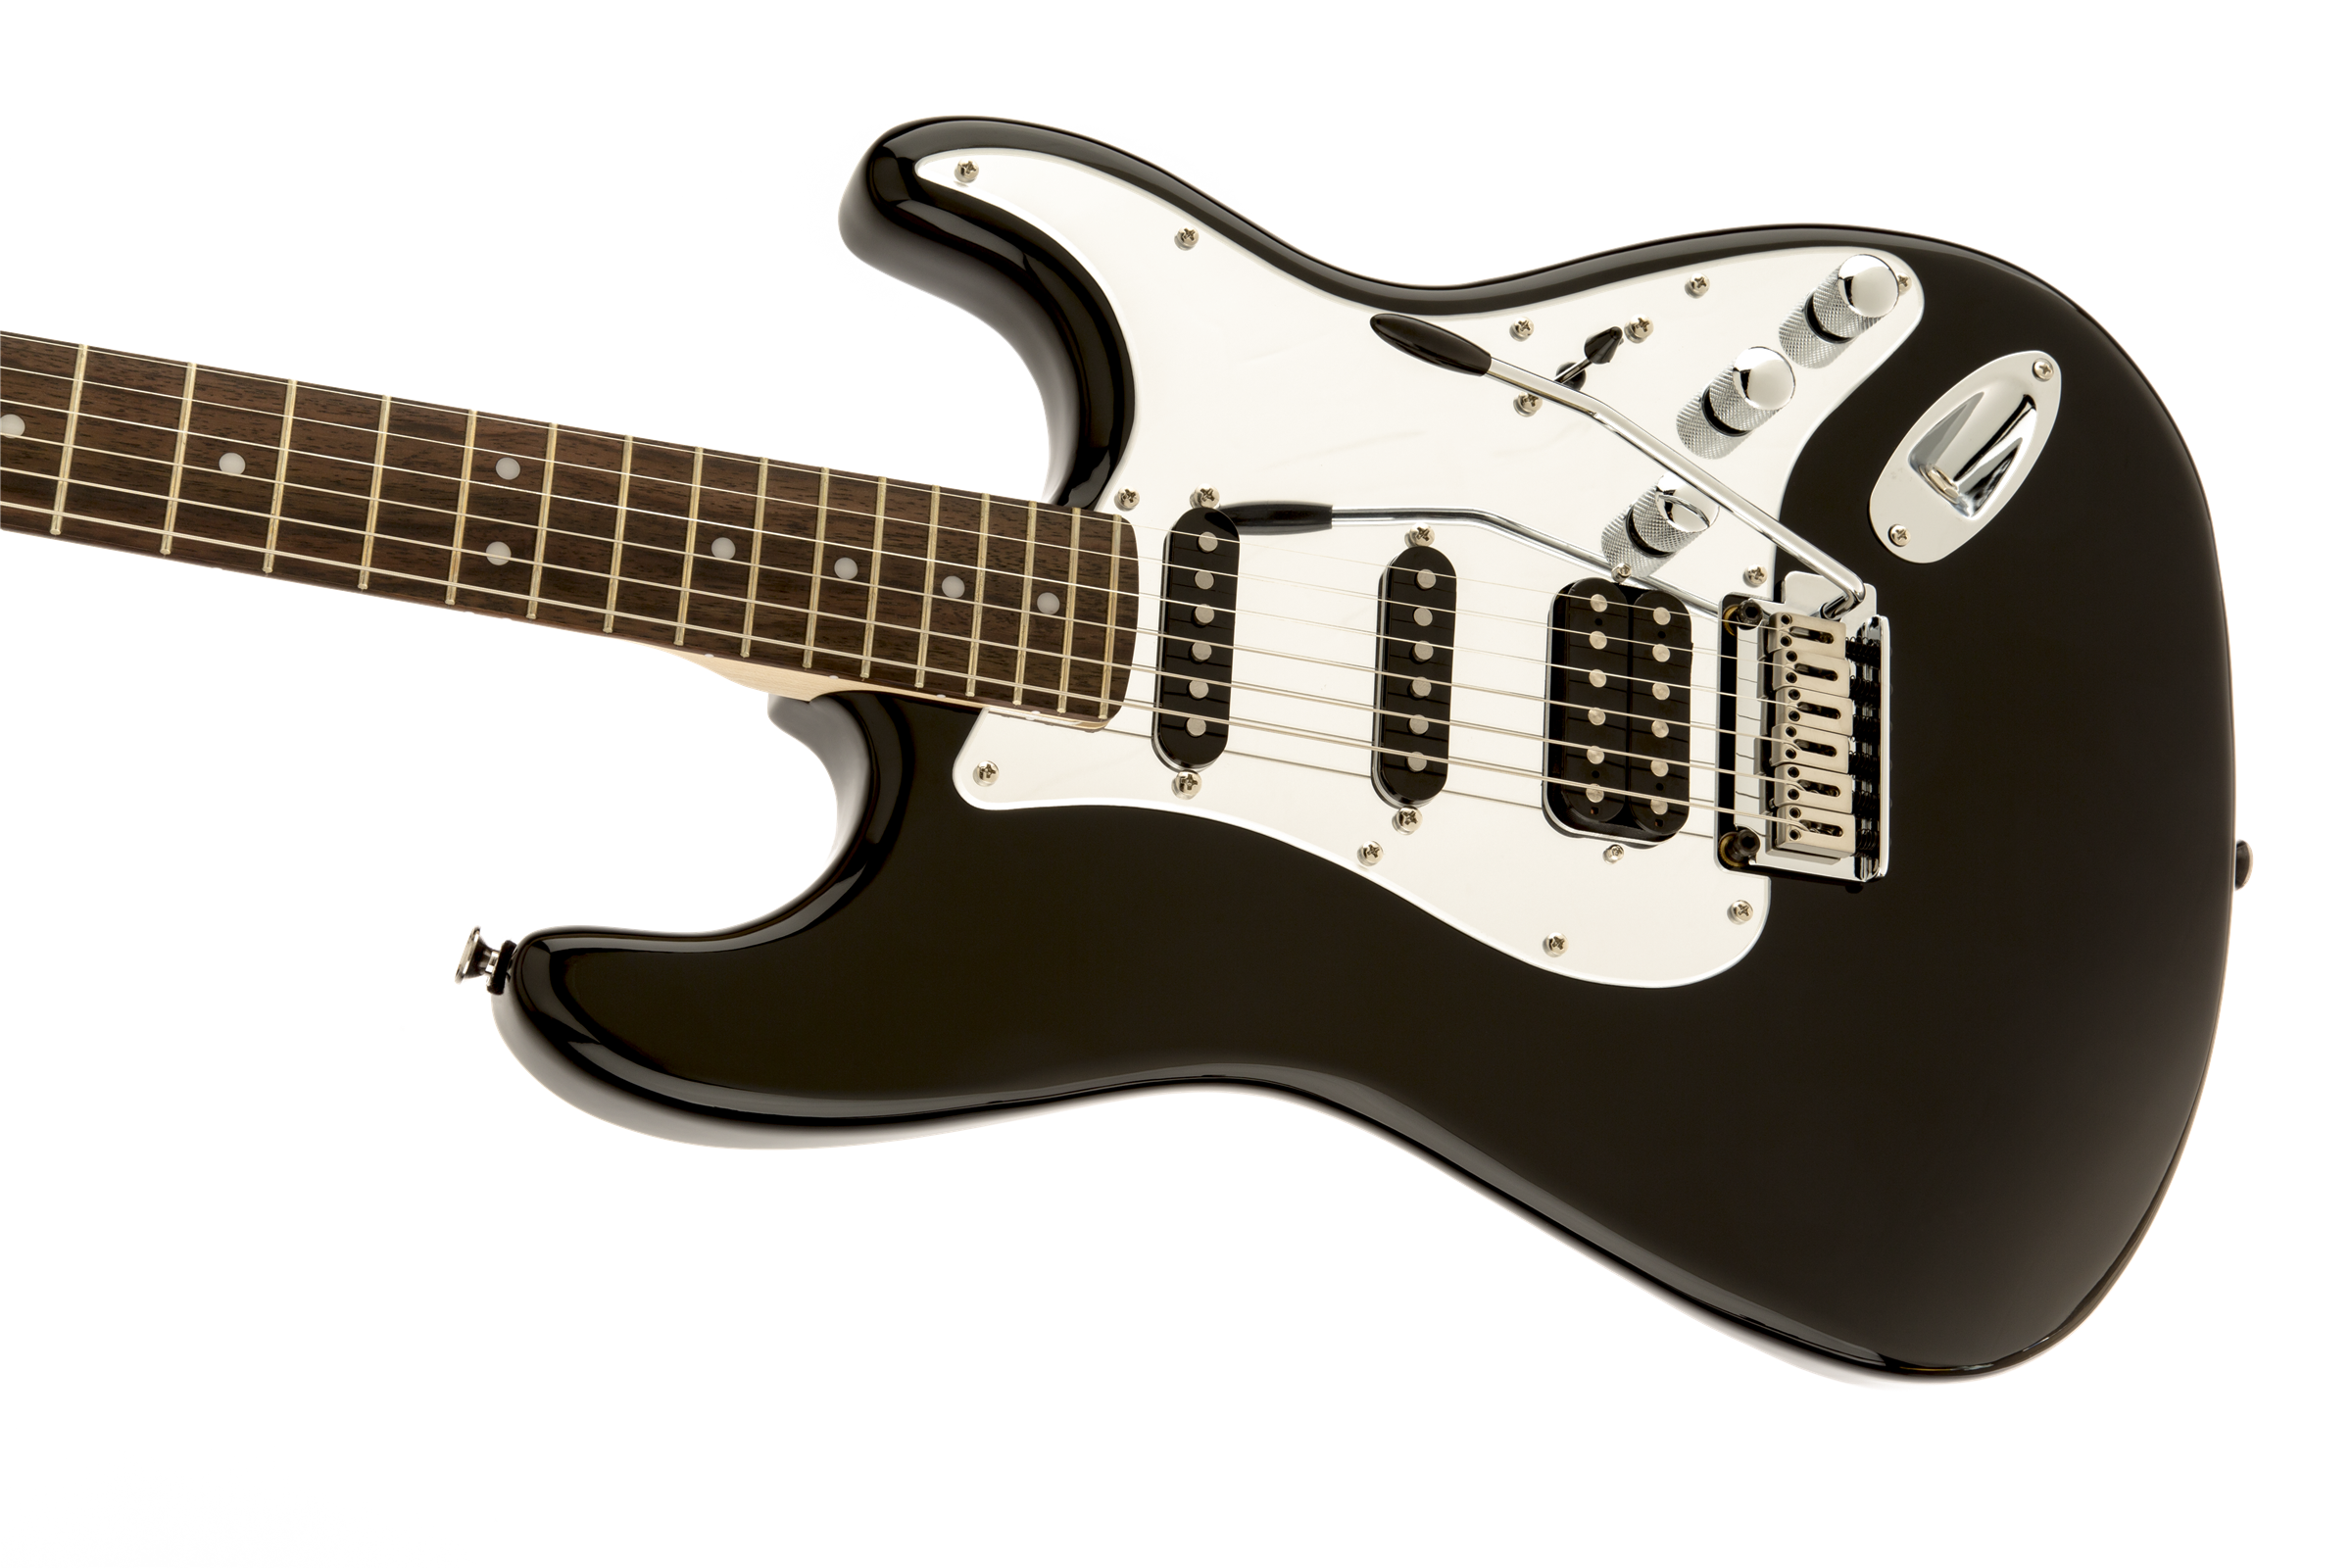 Squier stratocaster hss. Fender Squier Bullet Stratocaster гриф. Электрогитара Squier Bullet Strat Tremolo HSS. Squier Standard Stratocaster 2000 Black. Fender Bullet Stratocaster Squier пигард.